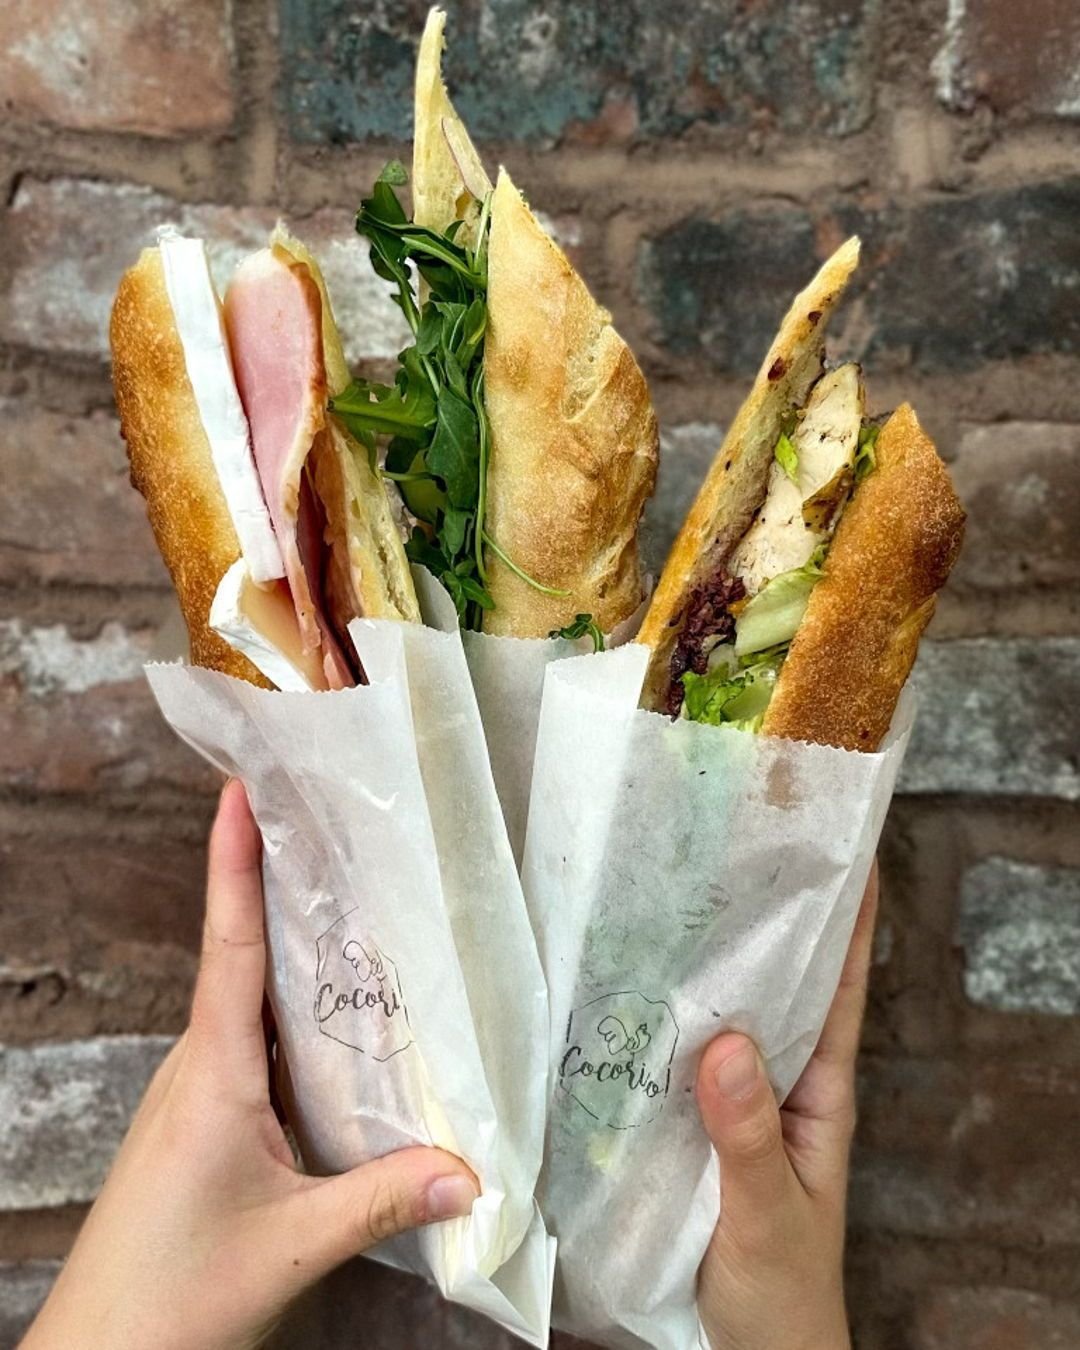 🥖 Who's hungry? 🥖 

We make lunch easy at Cocorico's French Bakery &amp; Cafe by serving up freshly made baguette sandwiches for you Tuesday - Saturday! ❣️ 

We currently have three flavor options to fit whatever craving you may have:
1. The Parisi